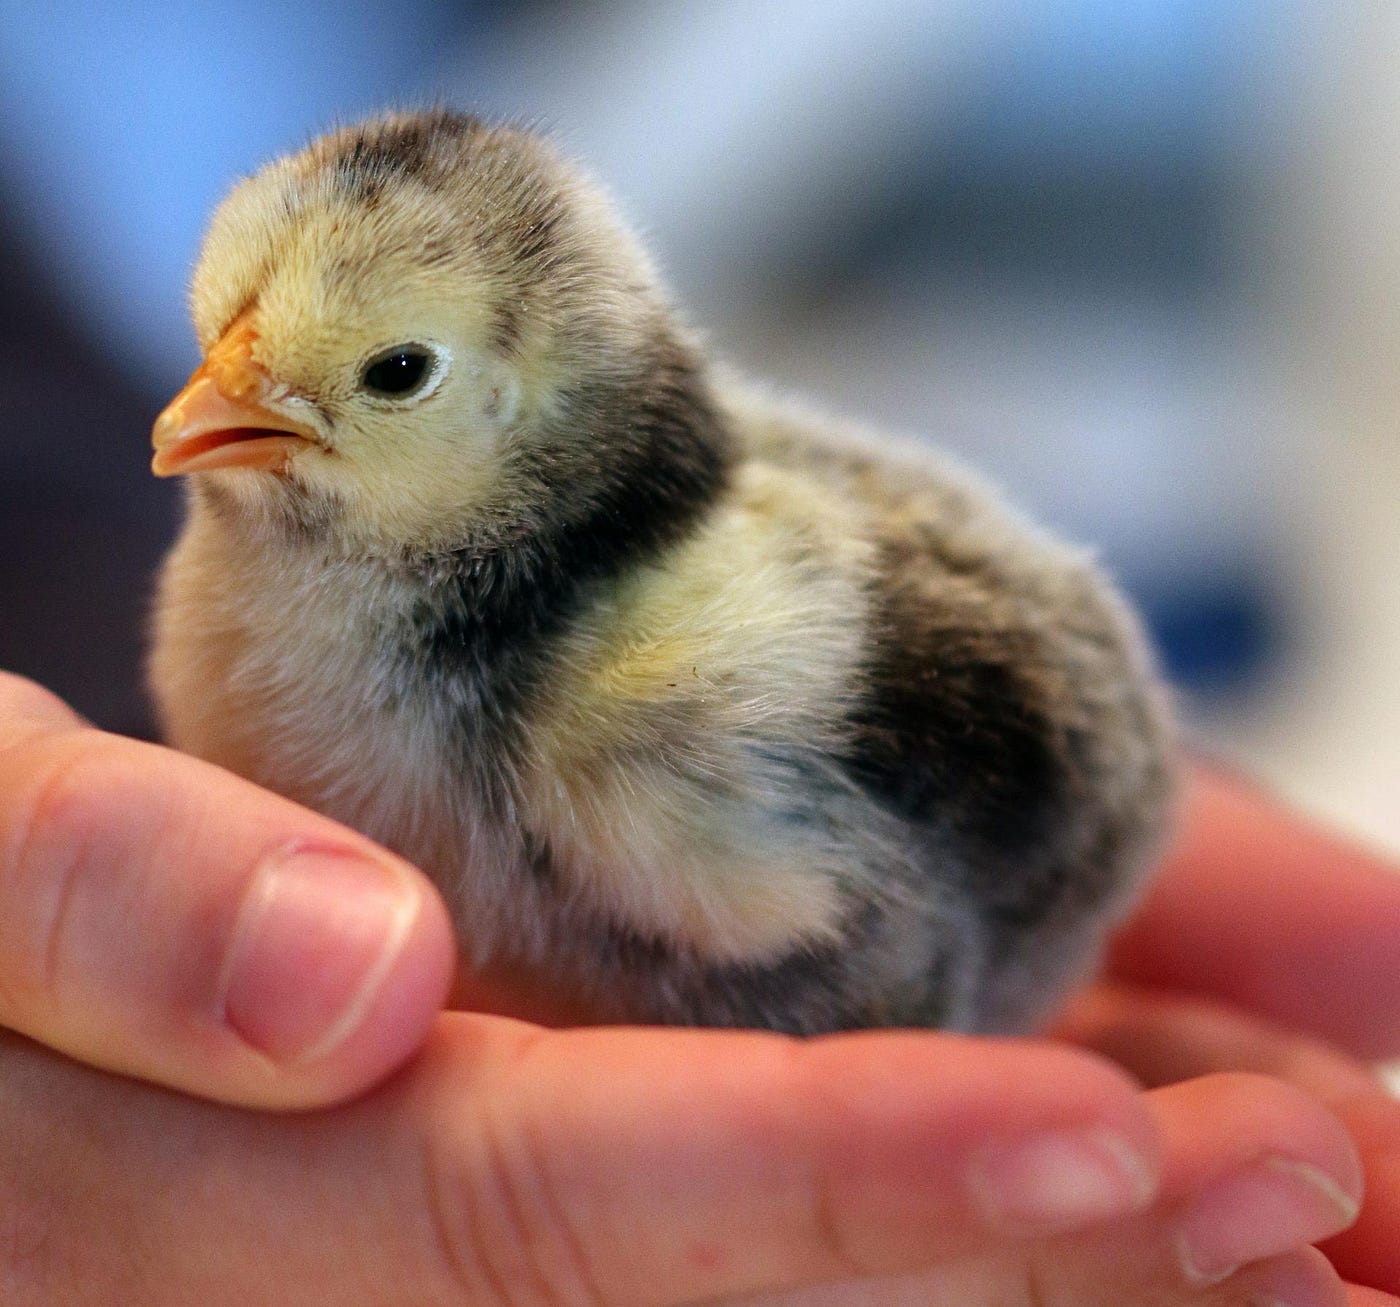 a child is holding a multicolored baby chick in their hand.